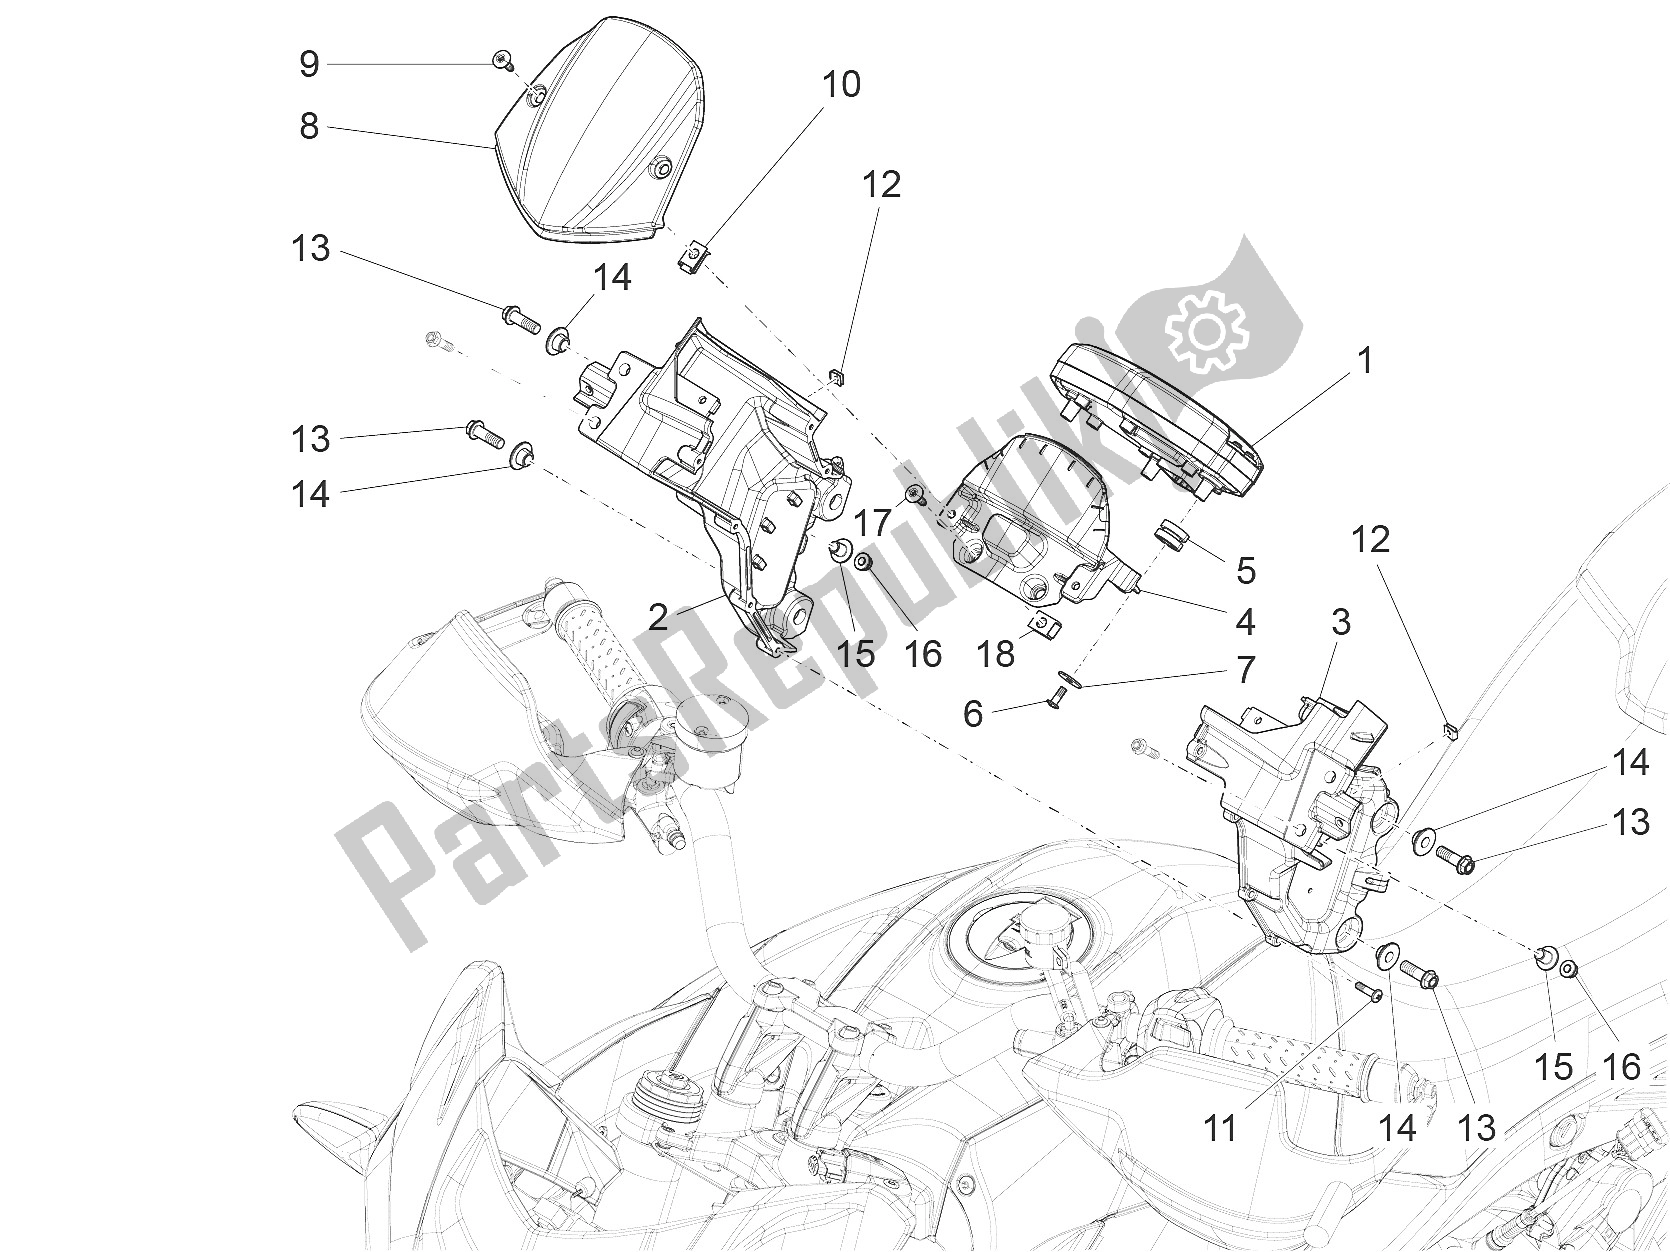 All parts for the Instruments of the Aprilia Caponord 1200 EU 2013